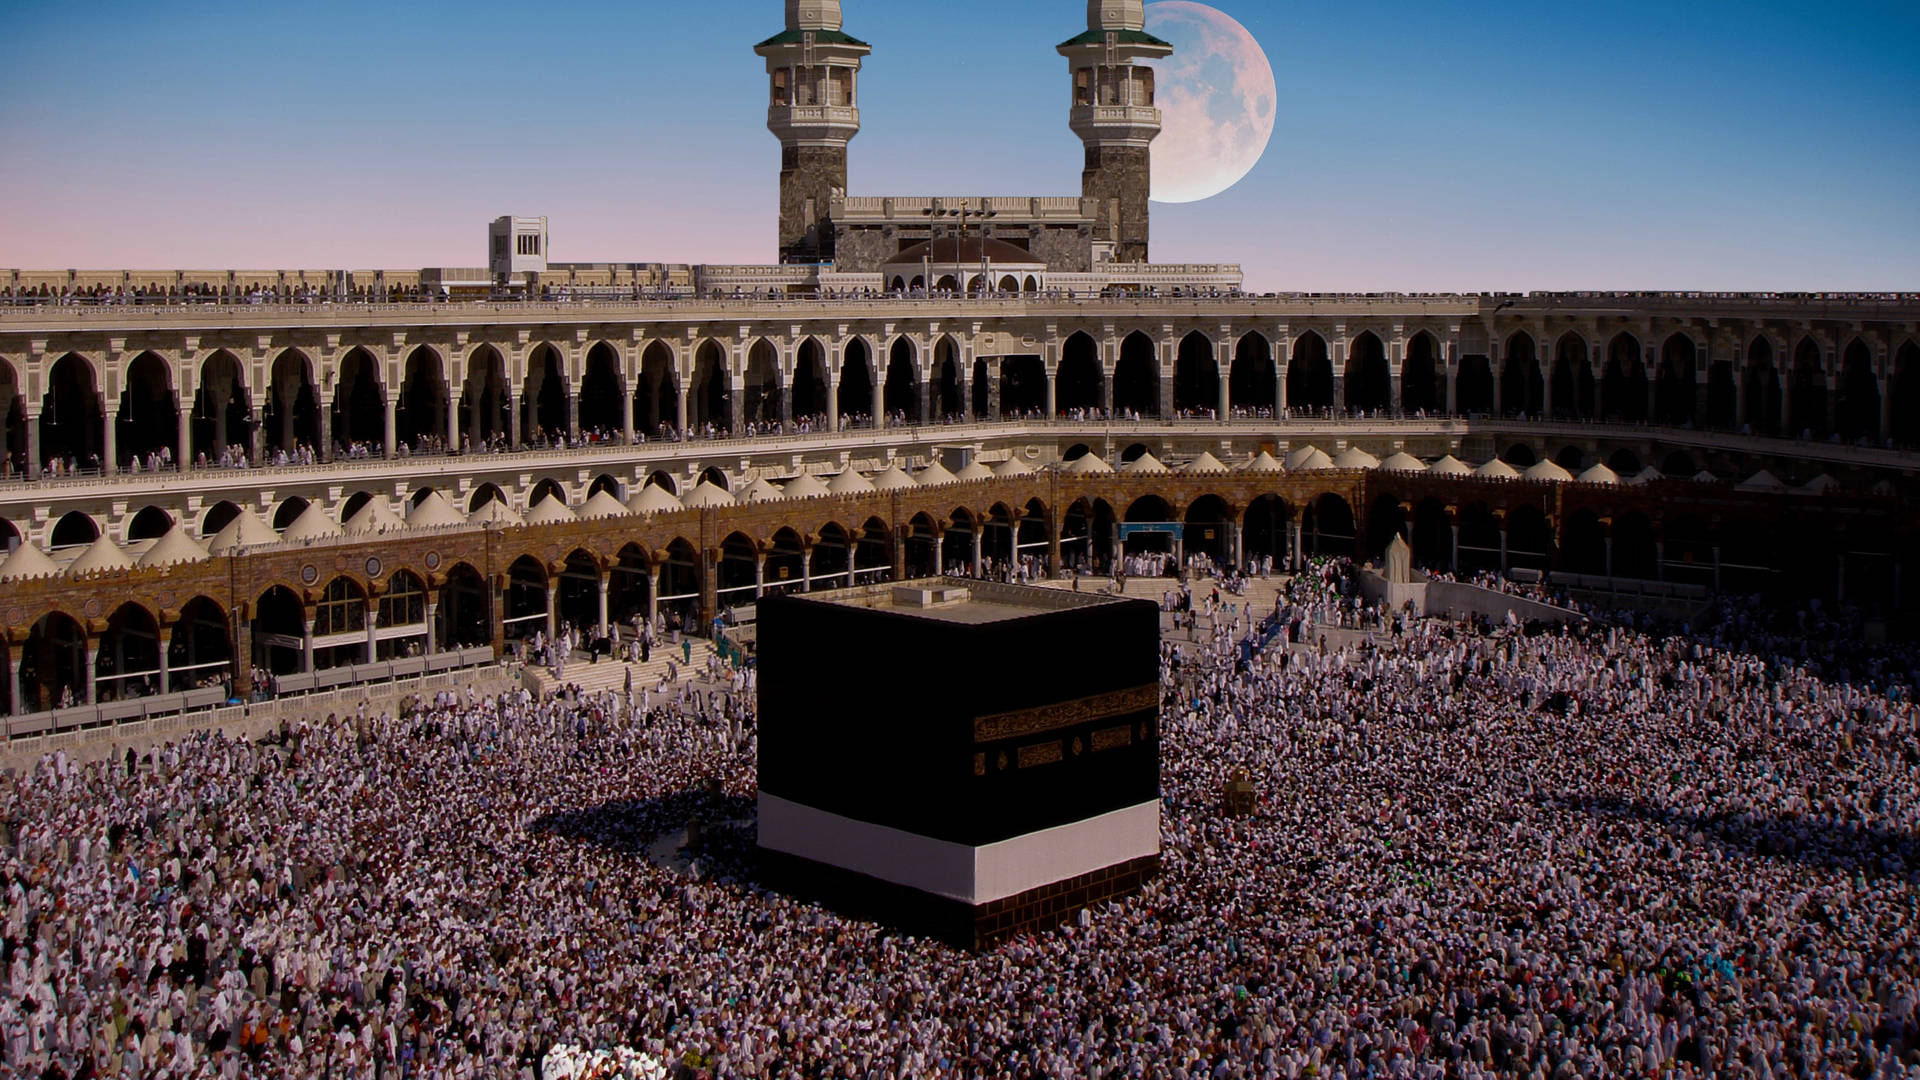 Majestic Kaaba Under The Gleaming Full Moon